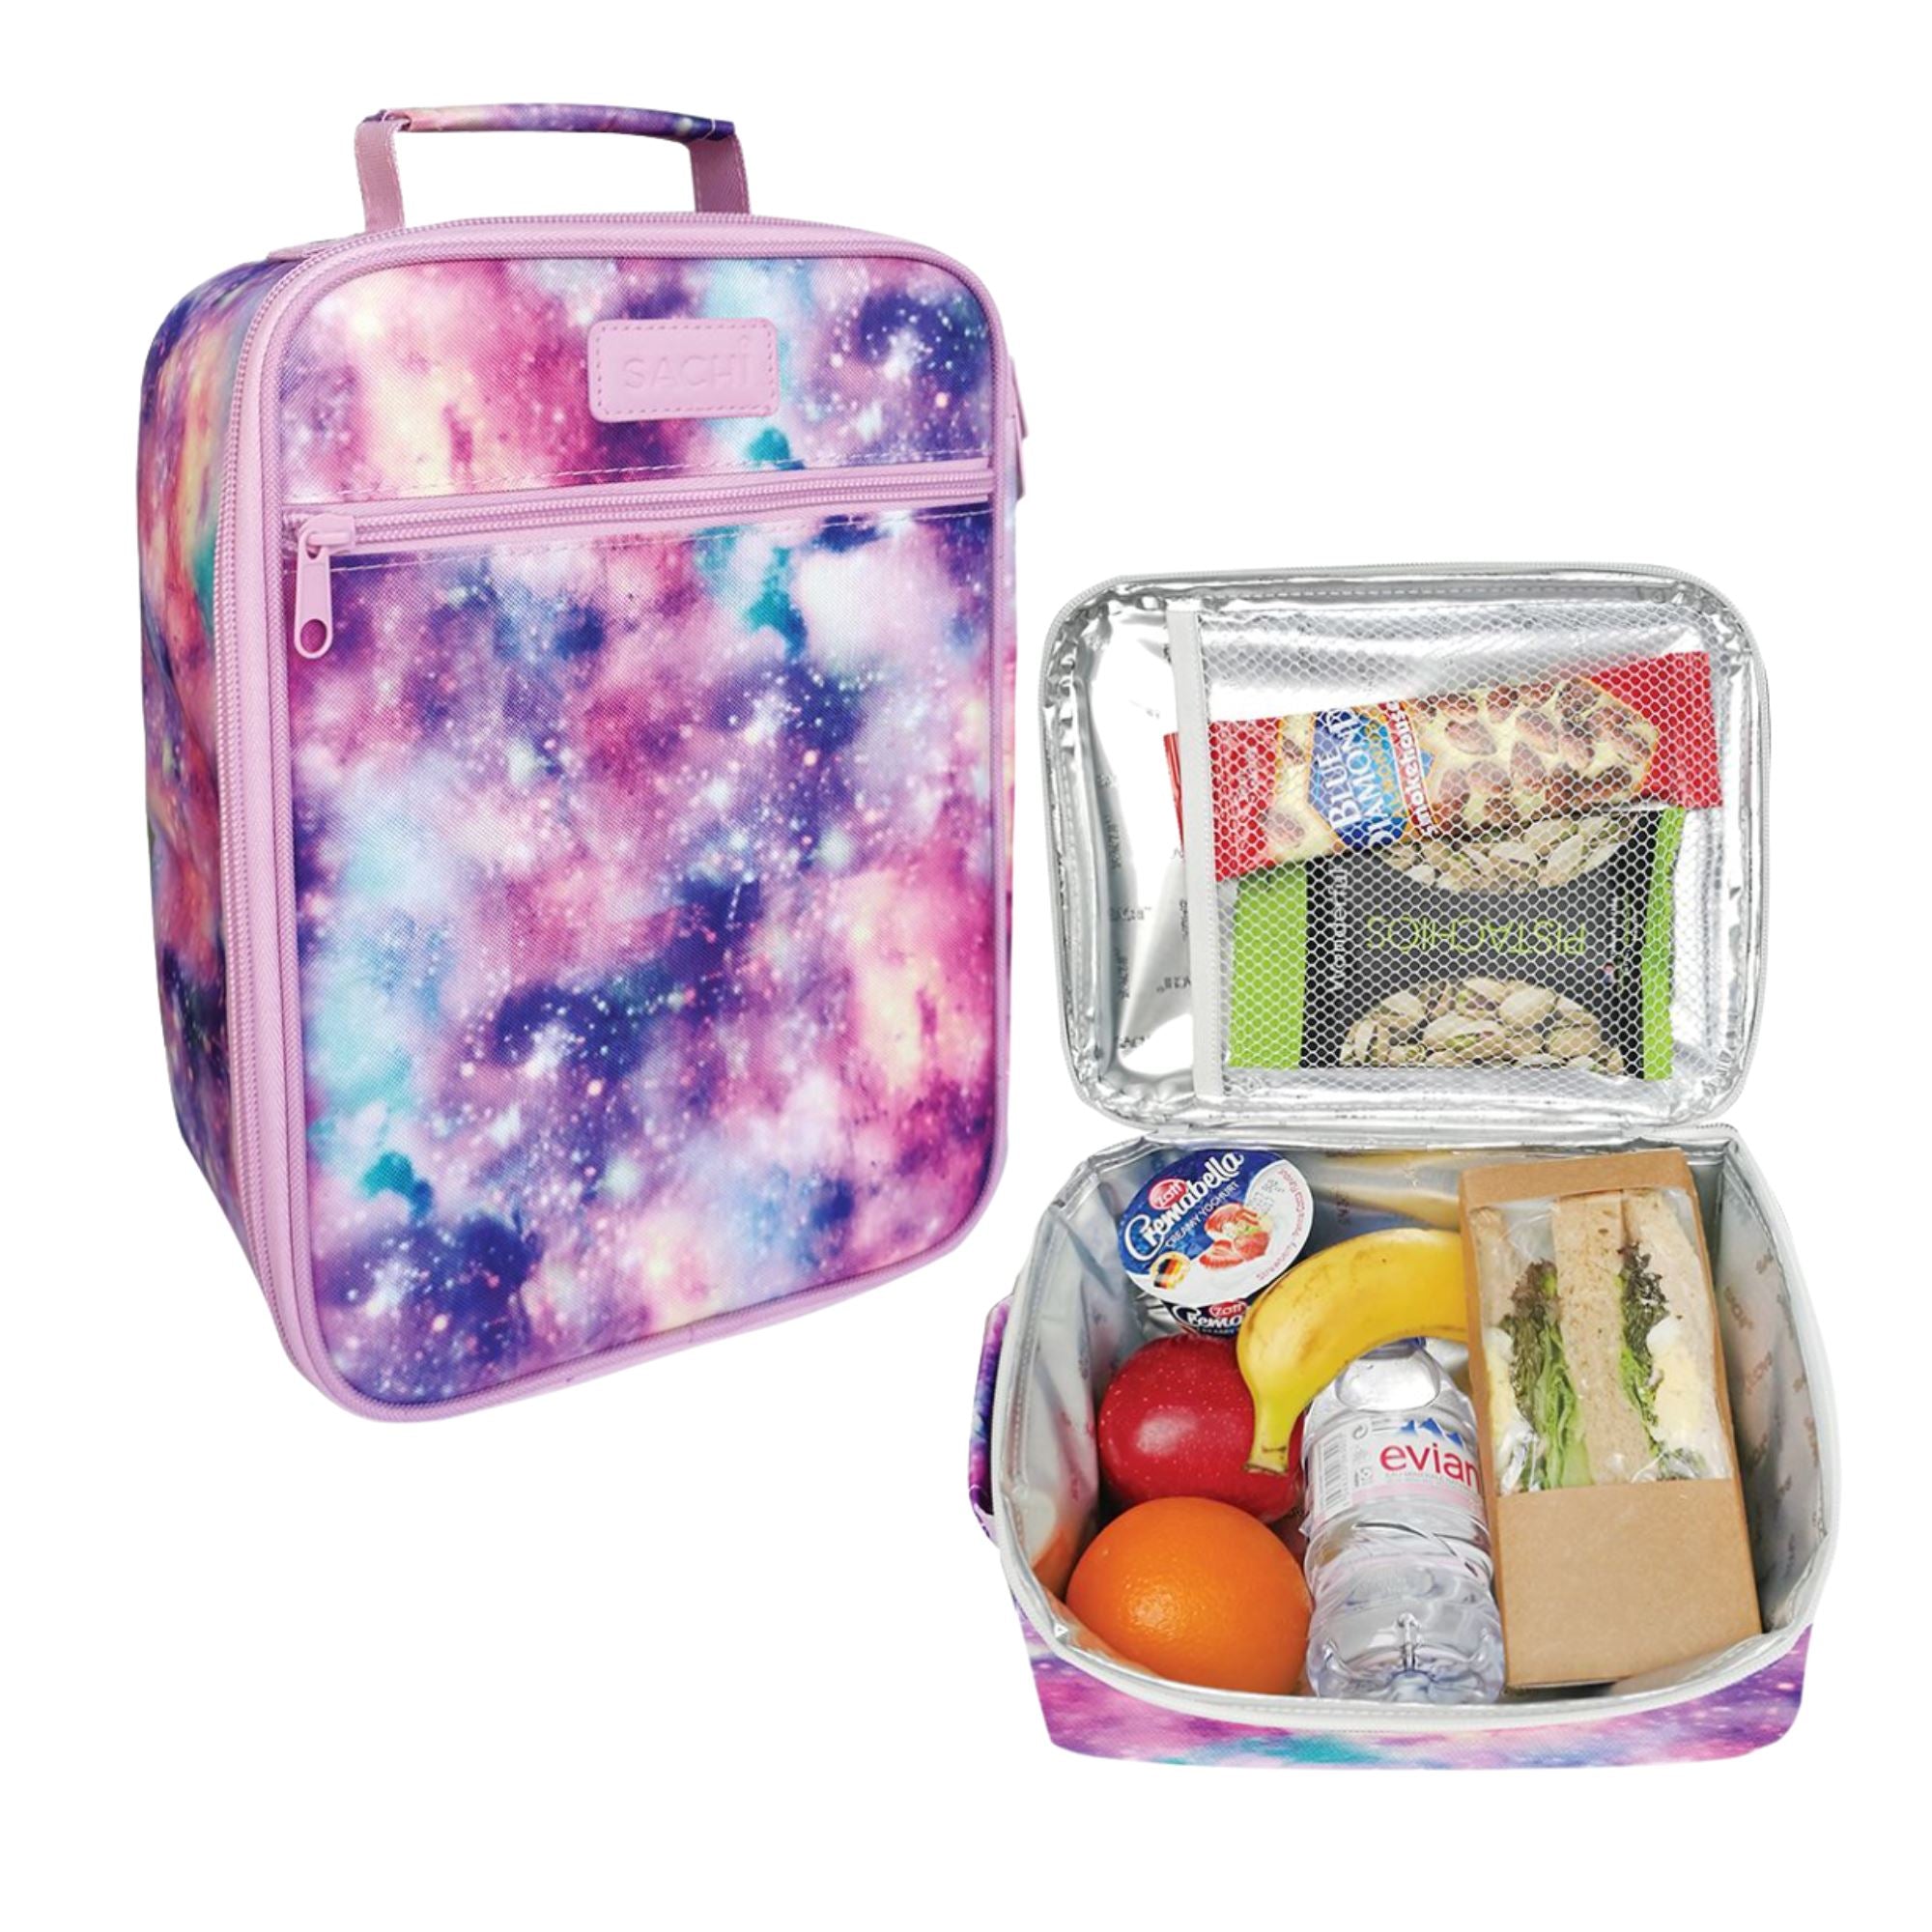 Sachi Insulated Galaxy Lunch Bag Lunch Boxes & Totes Sachi 